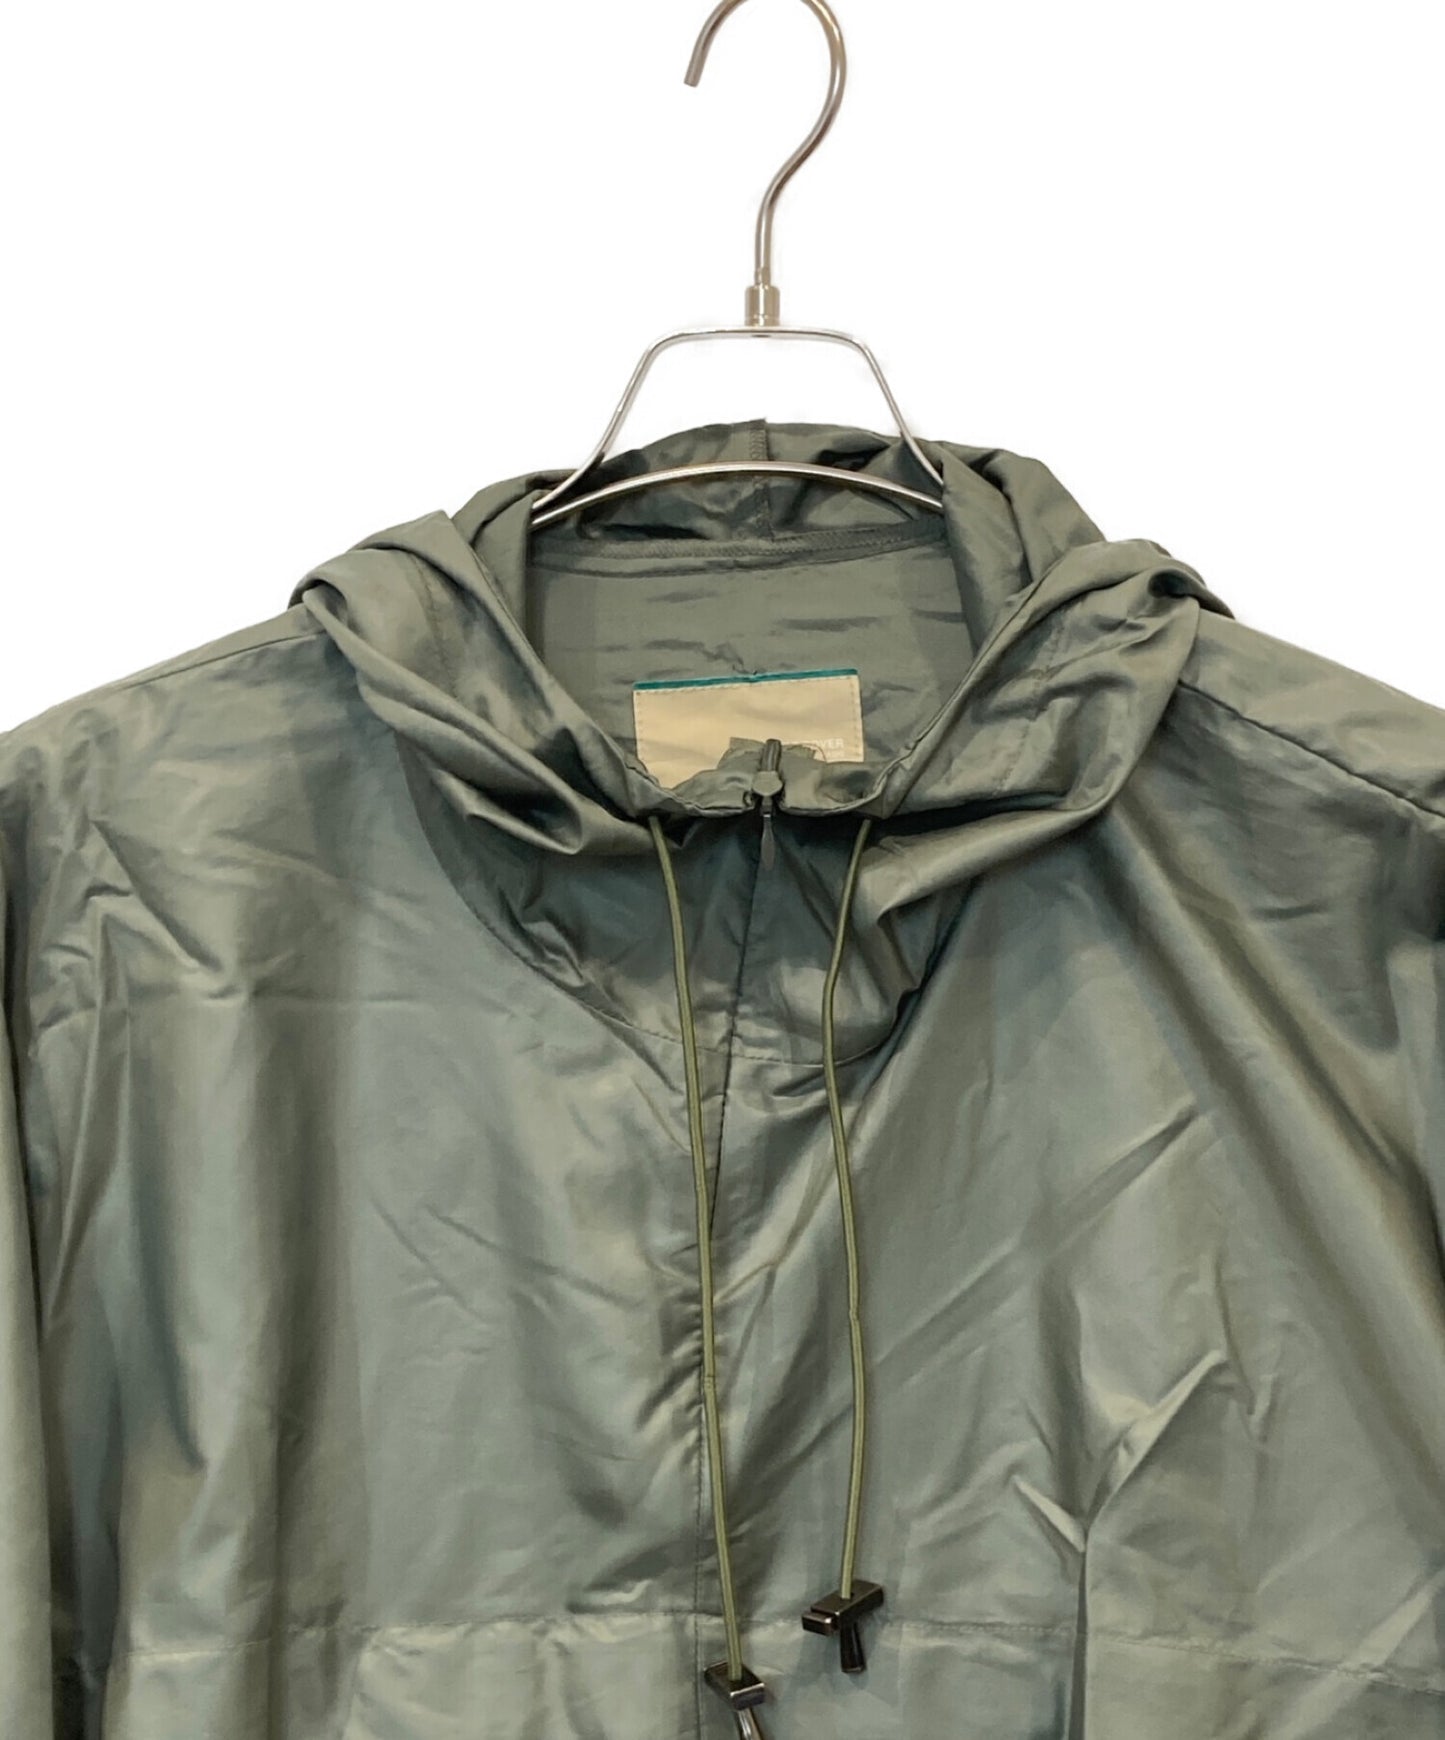 UNDERCOVER OLD] Anorak Parka